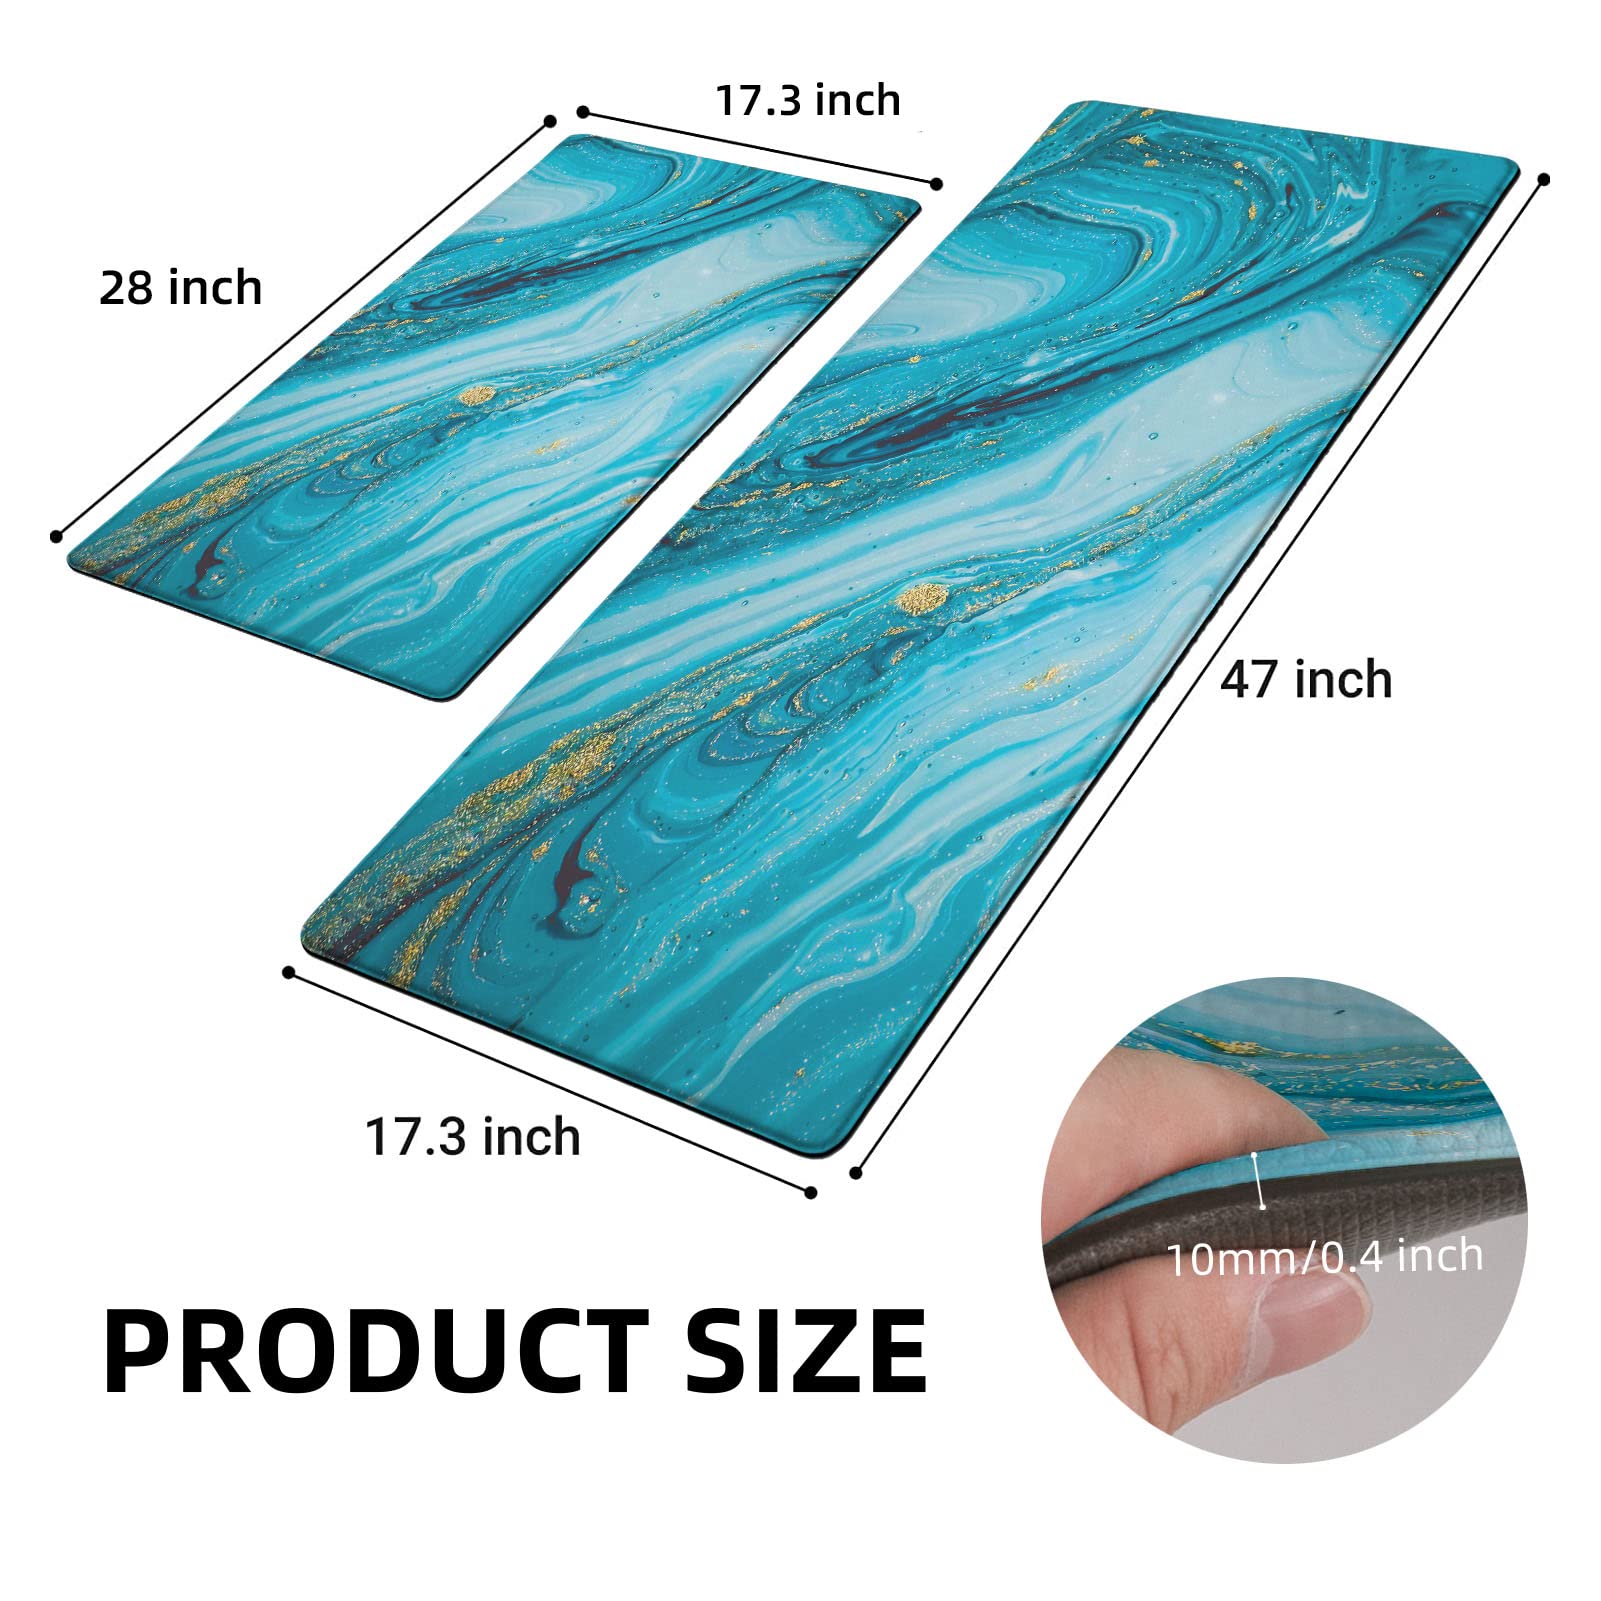 Turquoise Kitchen Rugs Mats Cushioned Anti Fatigue Mats for Kitchen Floor Teal Marble Kitchen Decor and Accessories Non Skid Waterproof Comfort Standing Rug 0.4 Inch for Kitchen 2 PCS 17"x28"+17"x47"